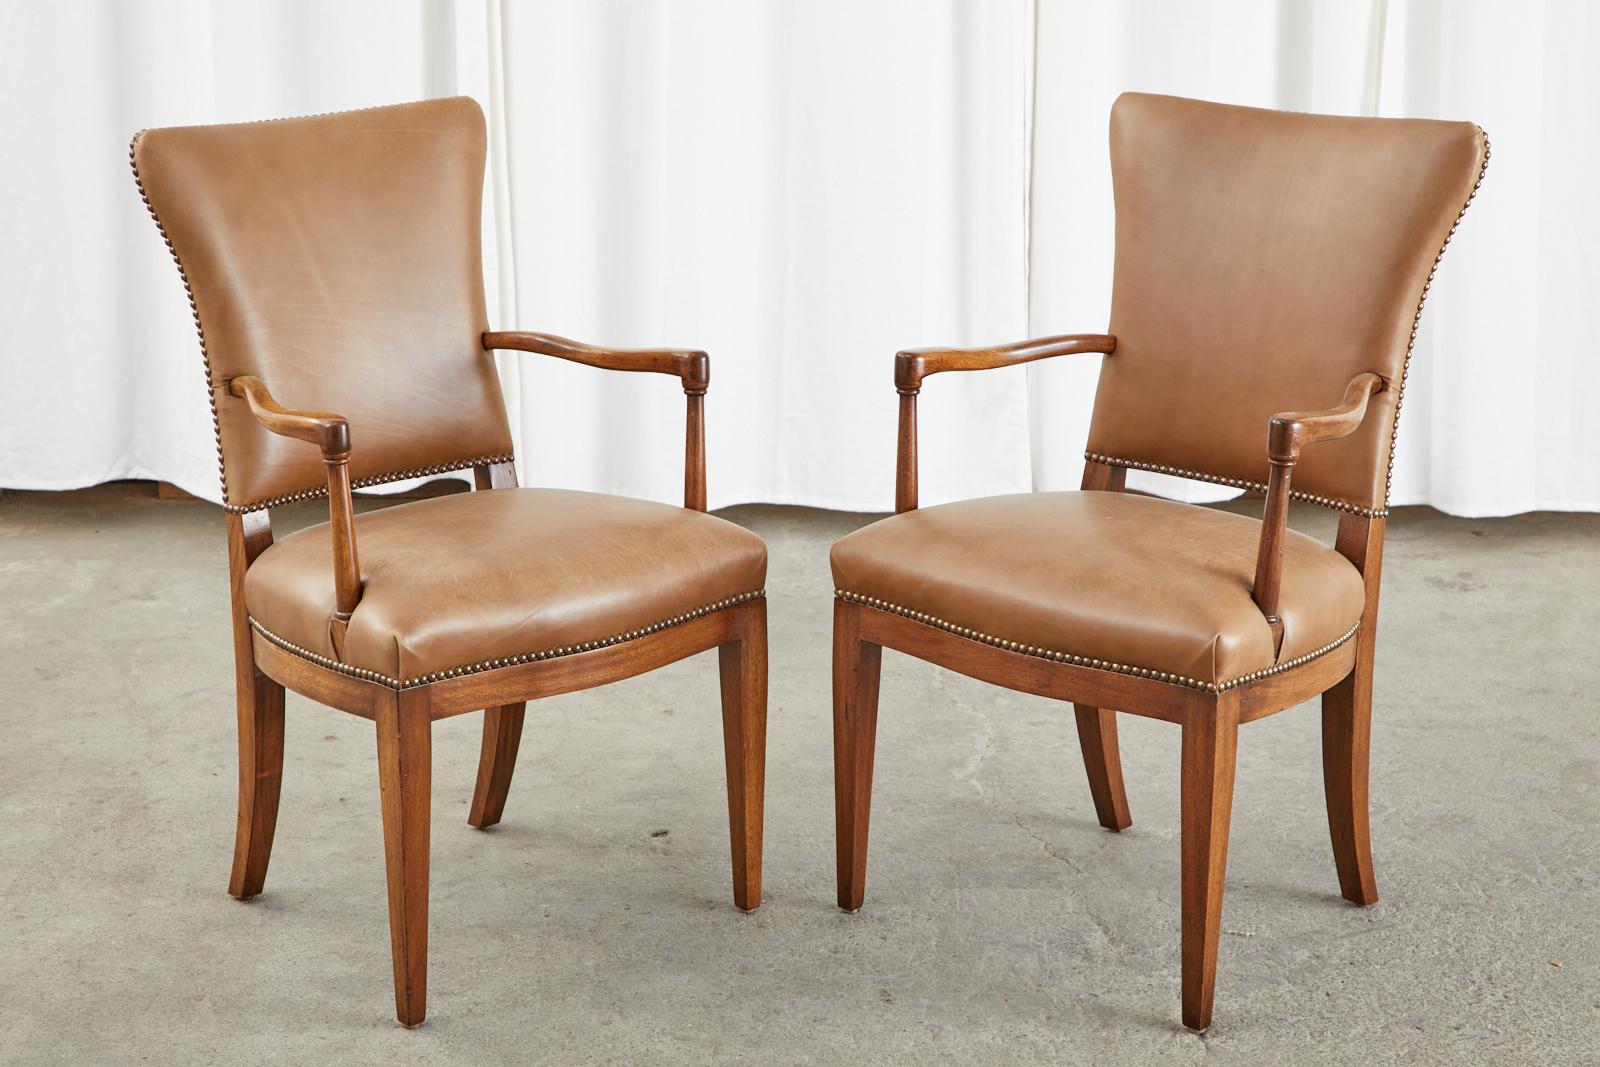 Extraordinary set of four French art deco chairs crafted from radiant mahogany after Jules Leleu. The chairs feature a large flared back with a contoured rest that is upholstered with an aged leather. The back has gracefully curved arms that conjoin